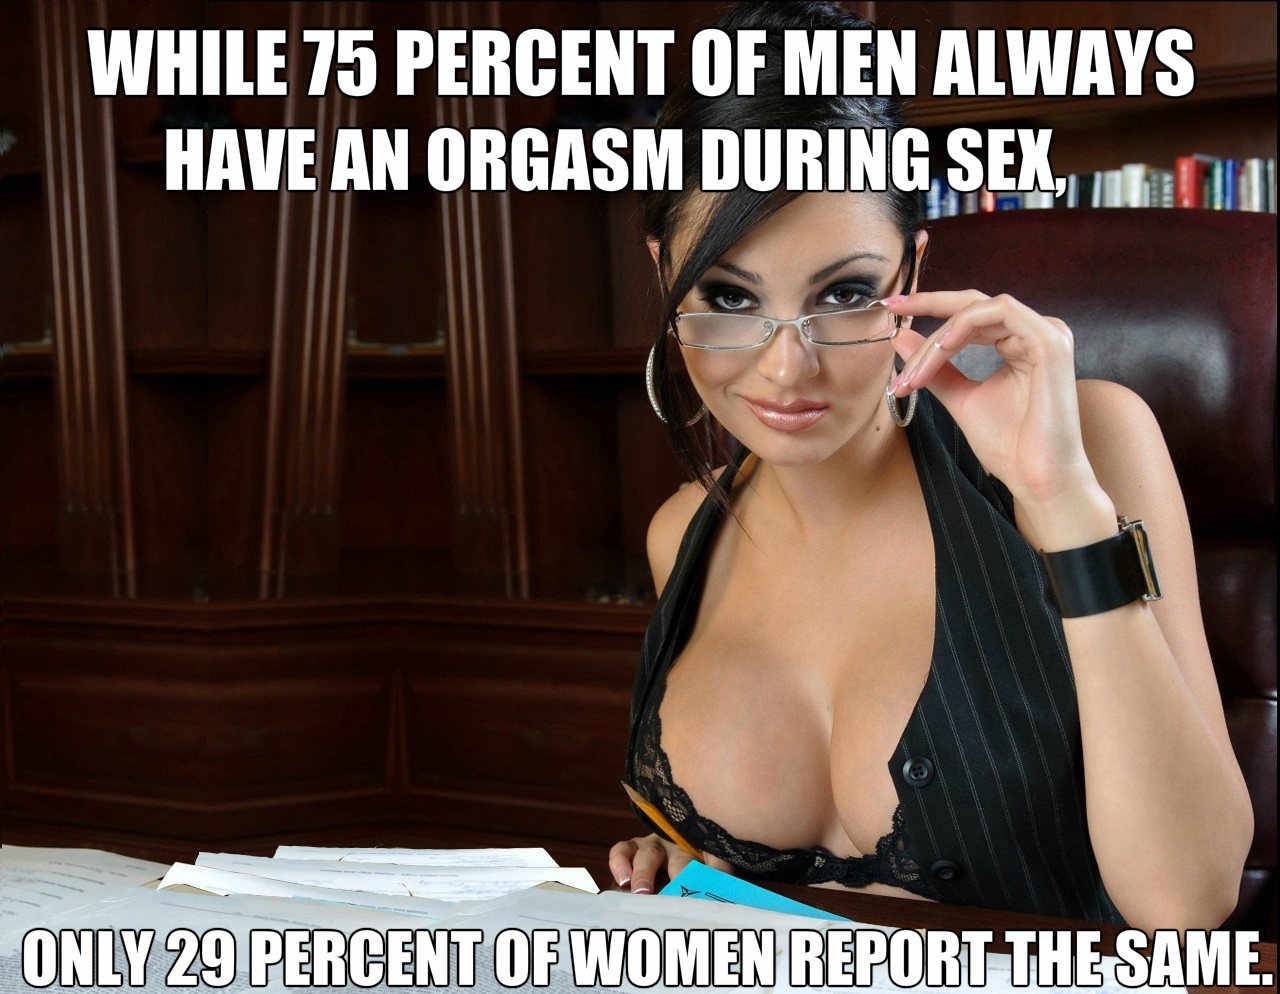 18 Sexually Oriented Facts That Will Arouse Your Interest